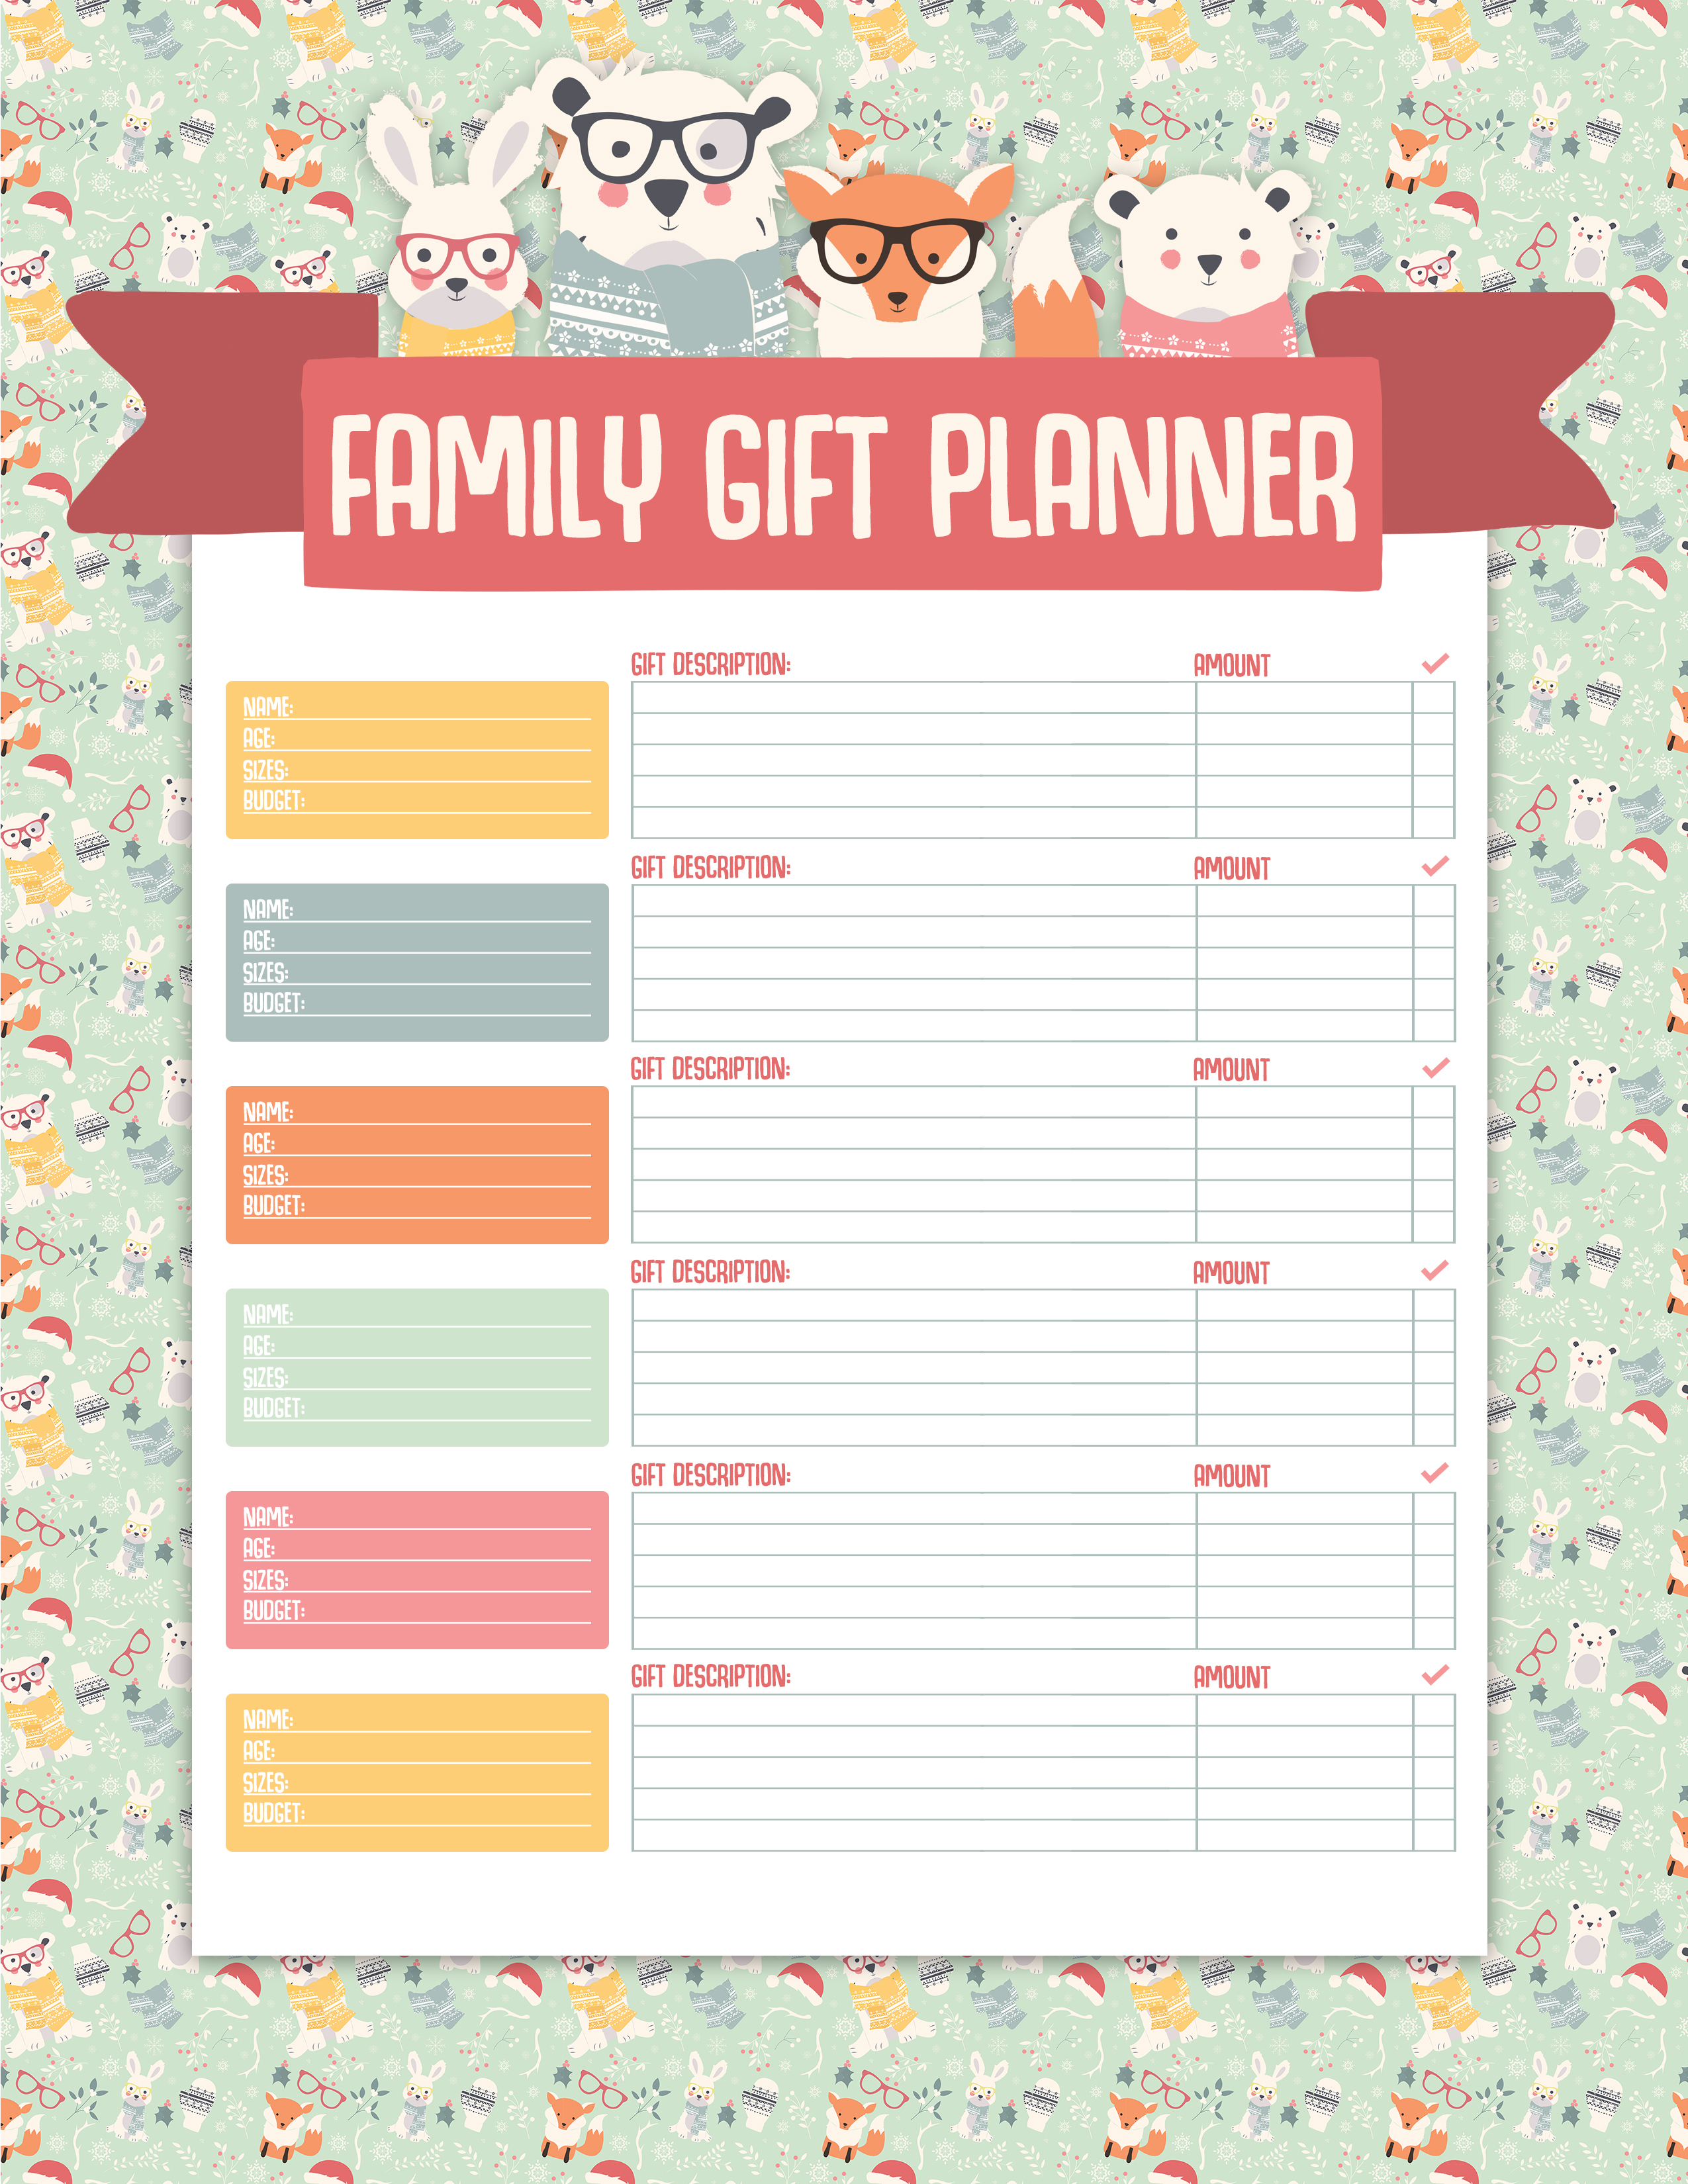 Free Printable Christmas Planner The Cottage Market